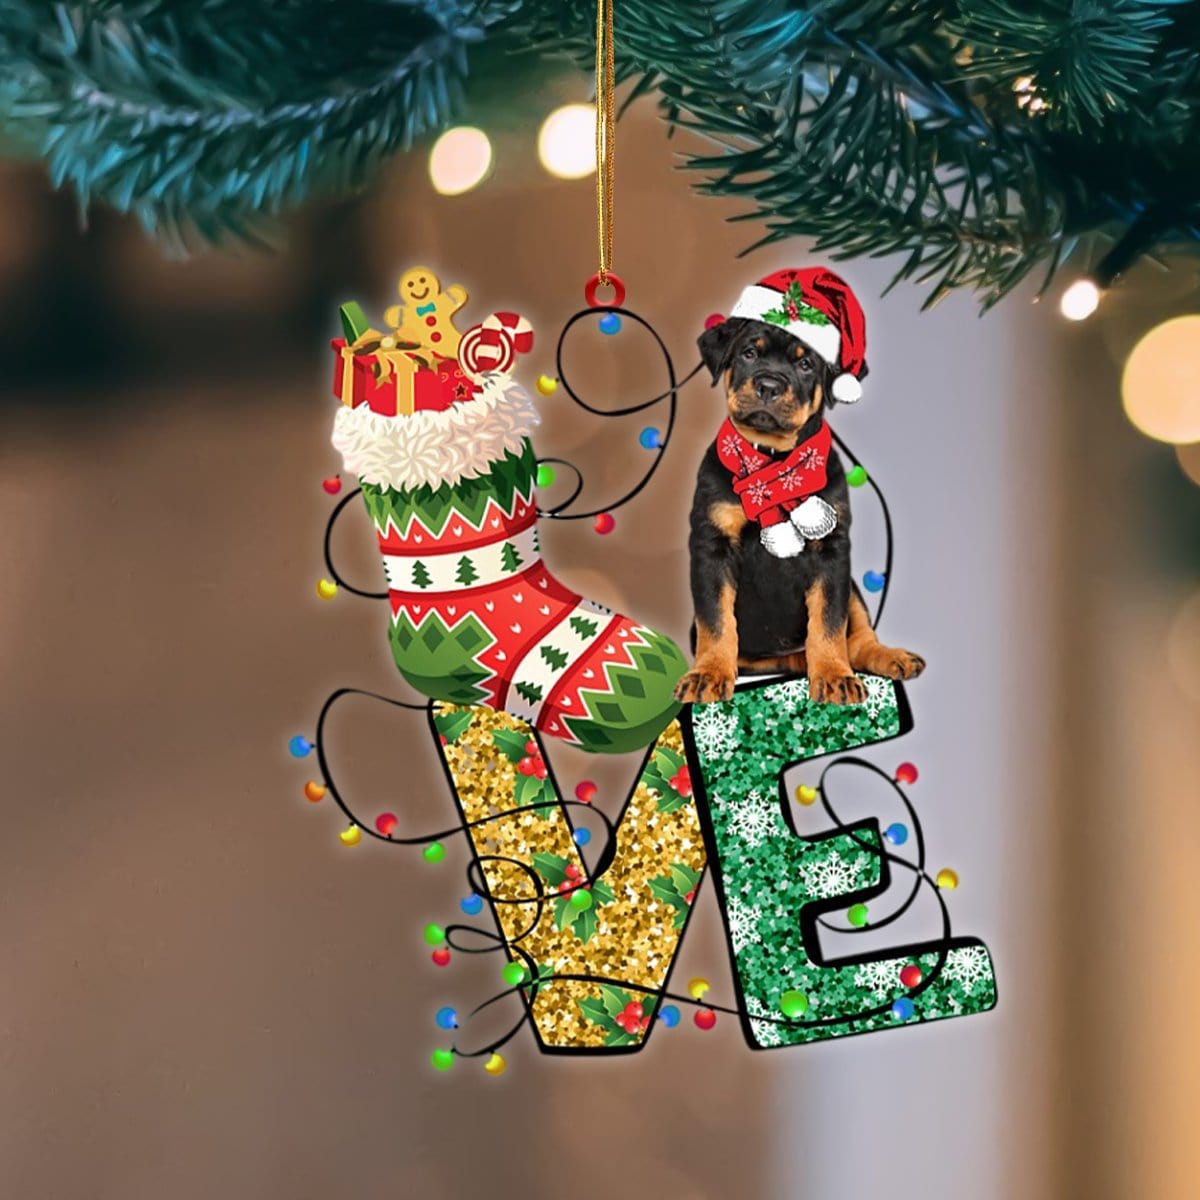 Rottweiler LOVE Stocking Merry Christmas Hanging Ornament